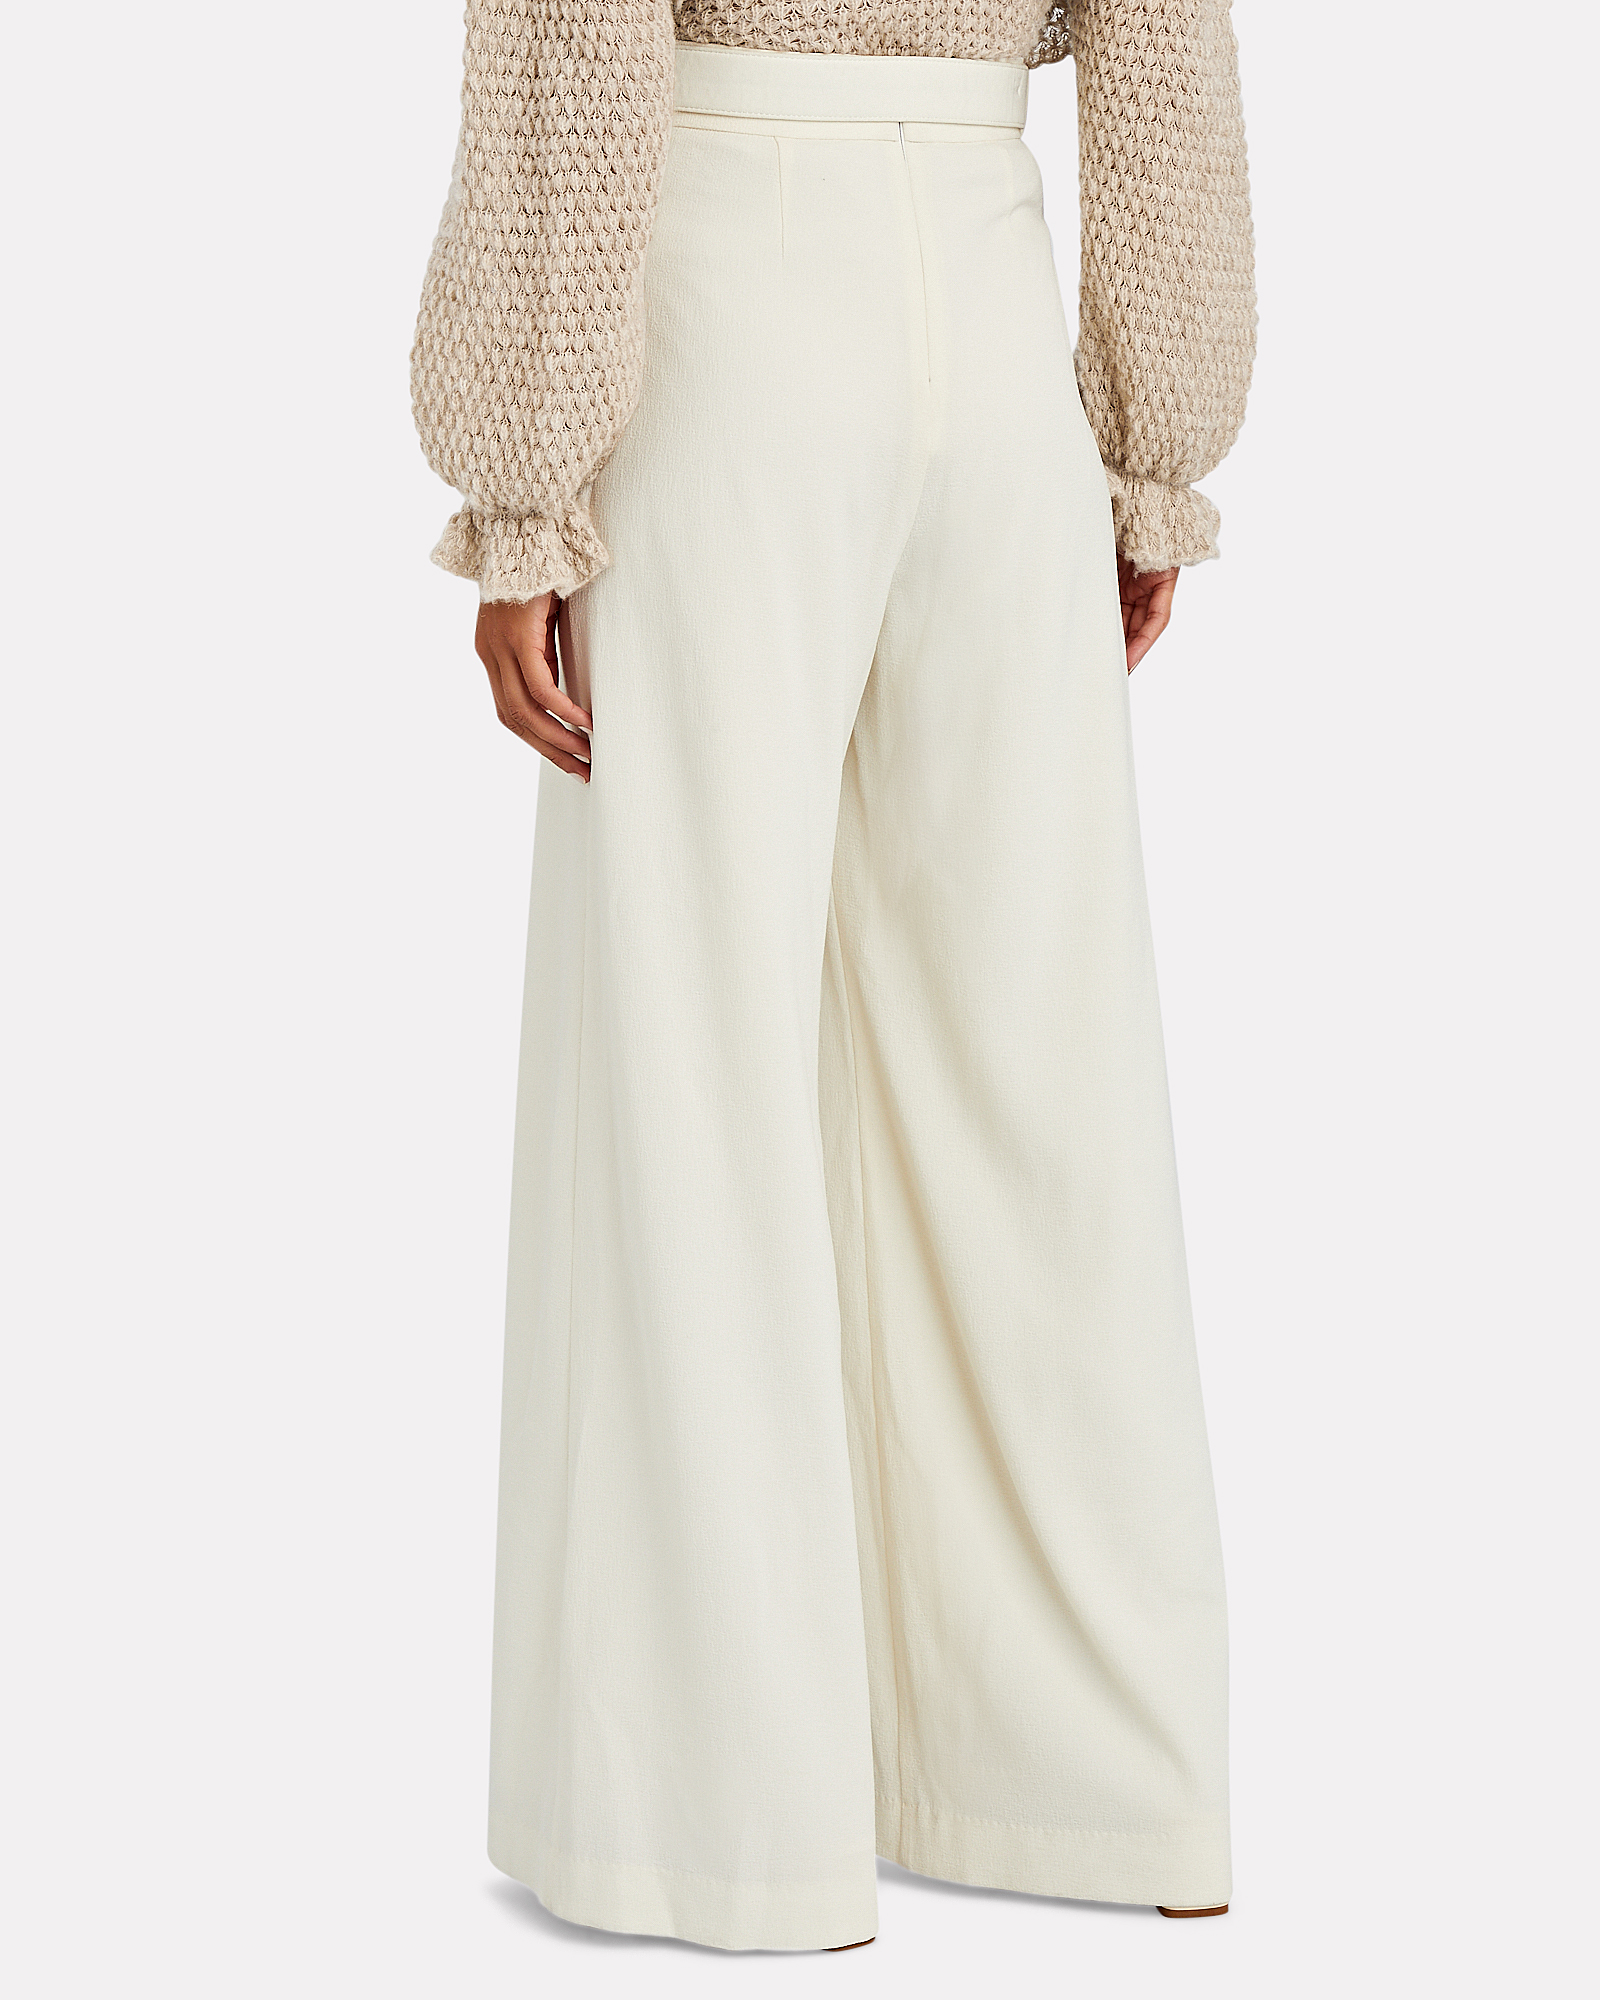 Zimmermann Belted High-Rise Crepe Pants | INTERMIX®